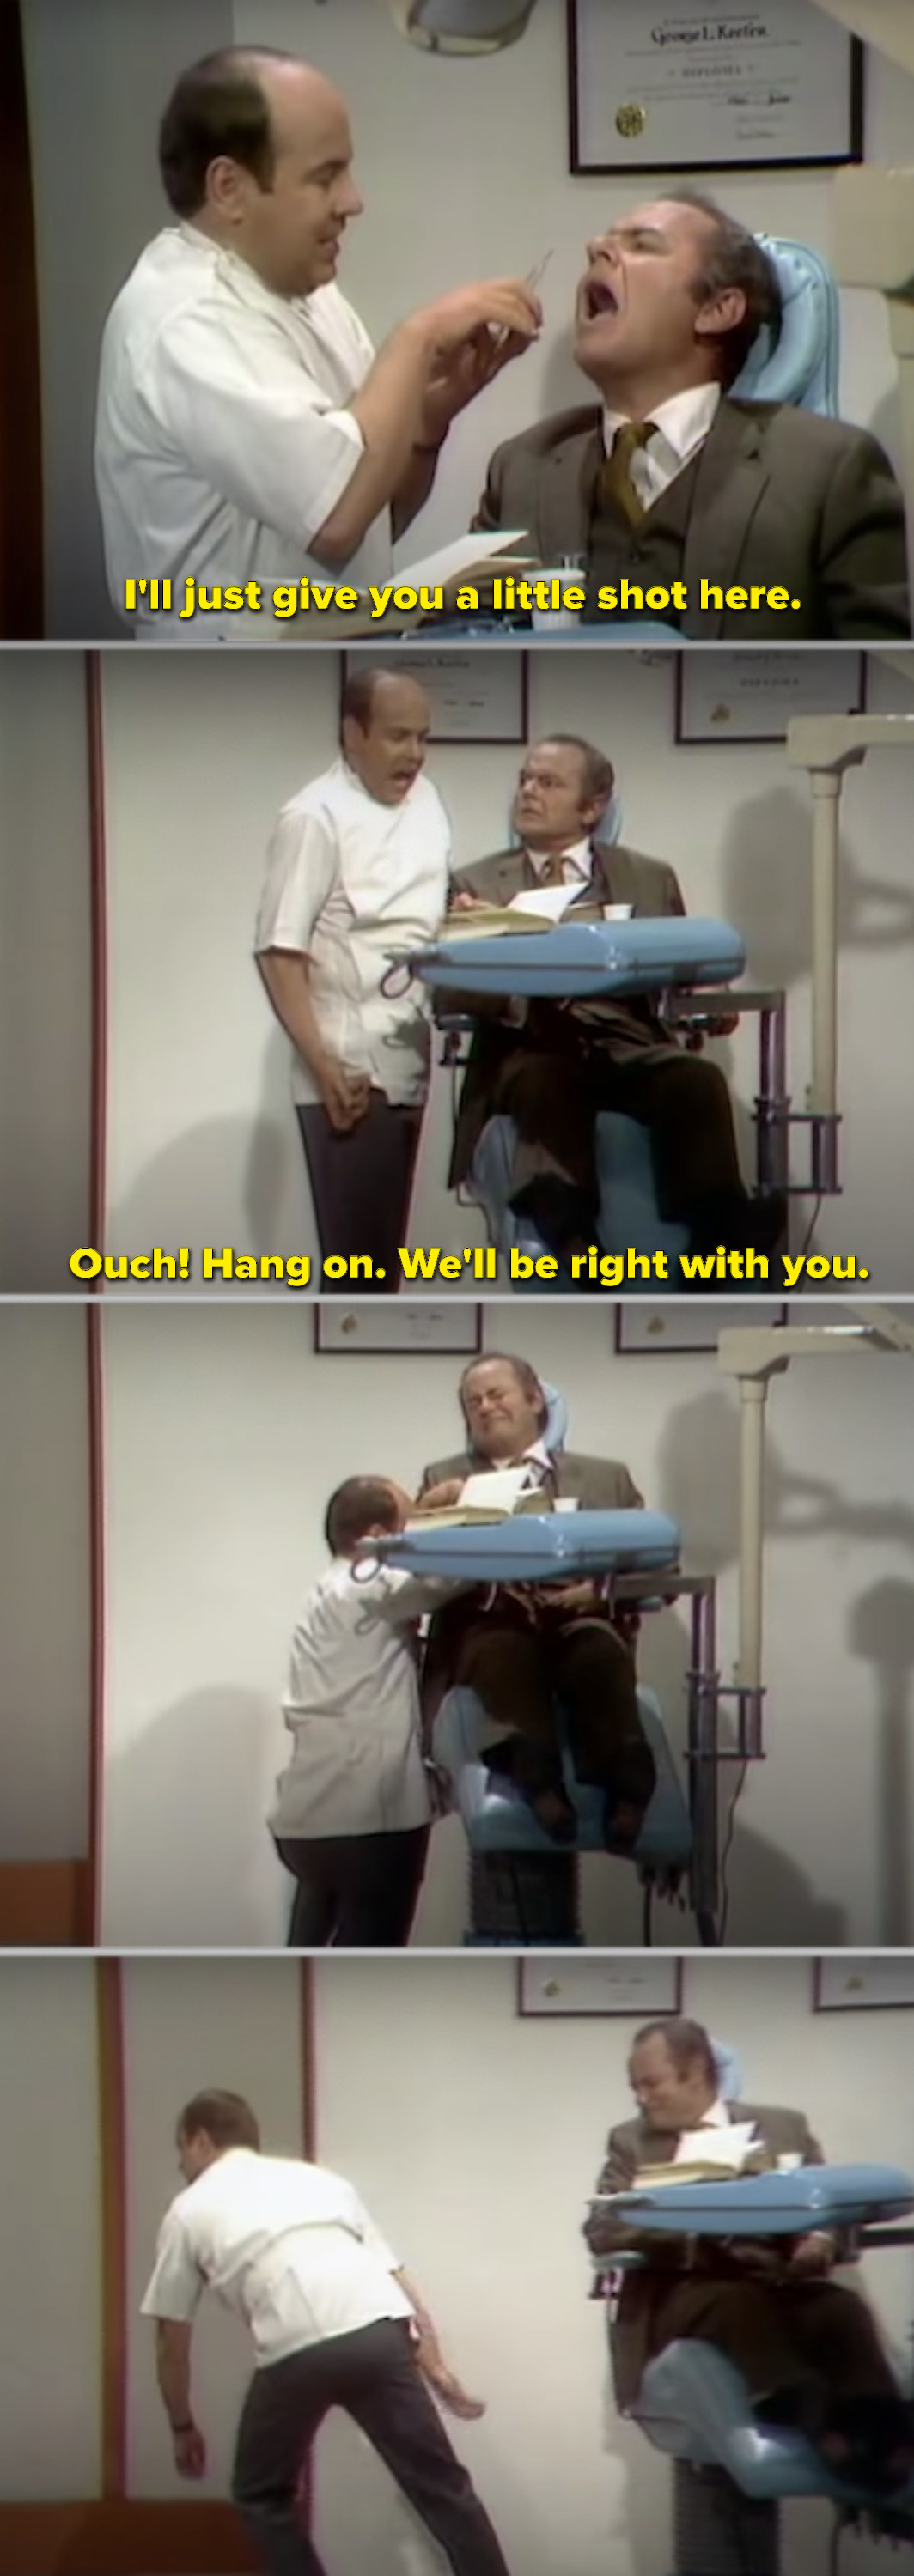 Tim Conway as a dentist getting hit with the Novocaine needle, making his legs and arms go numb in front of a patient